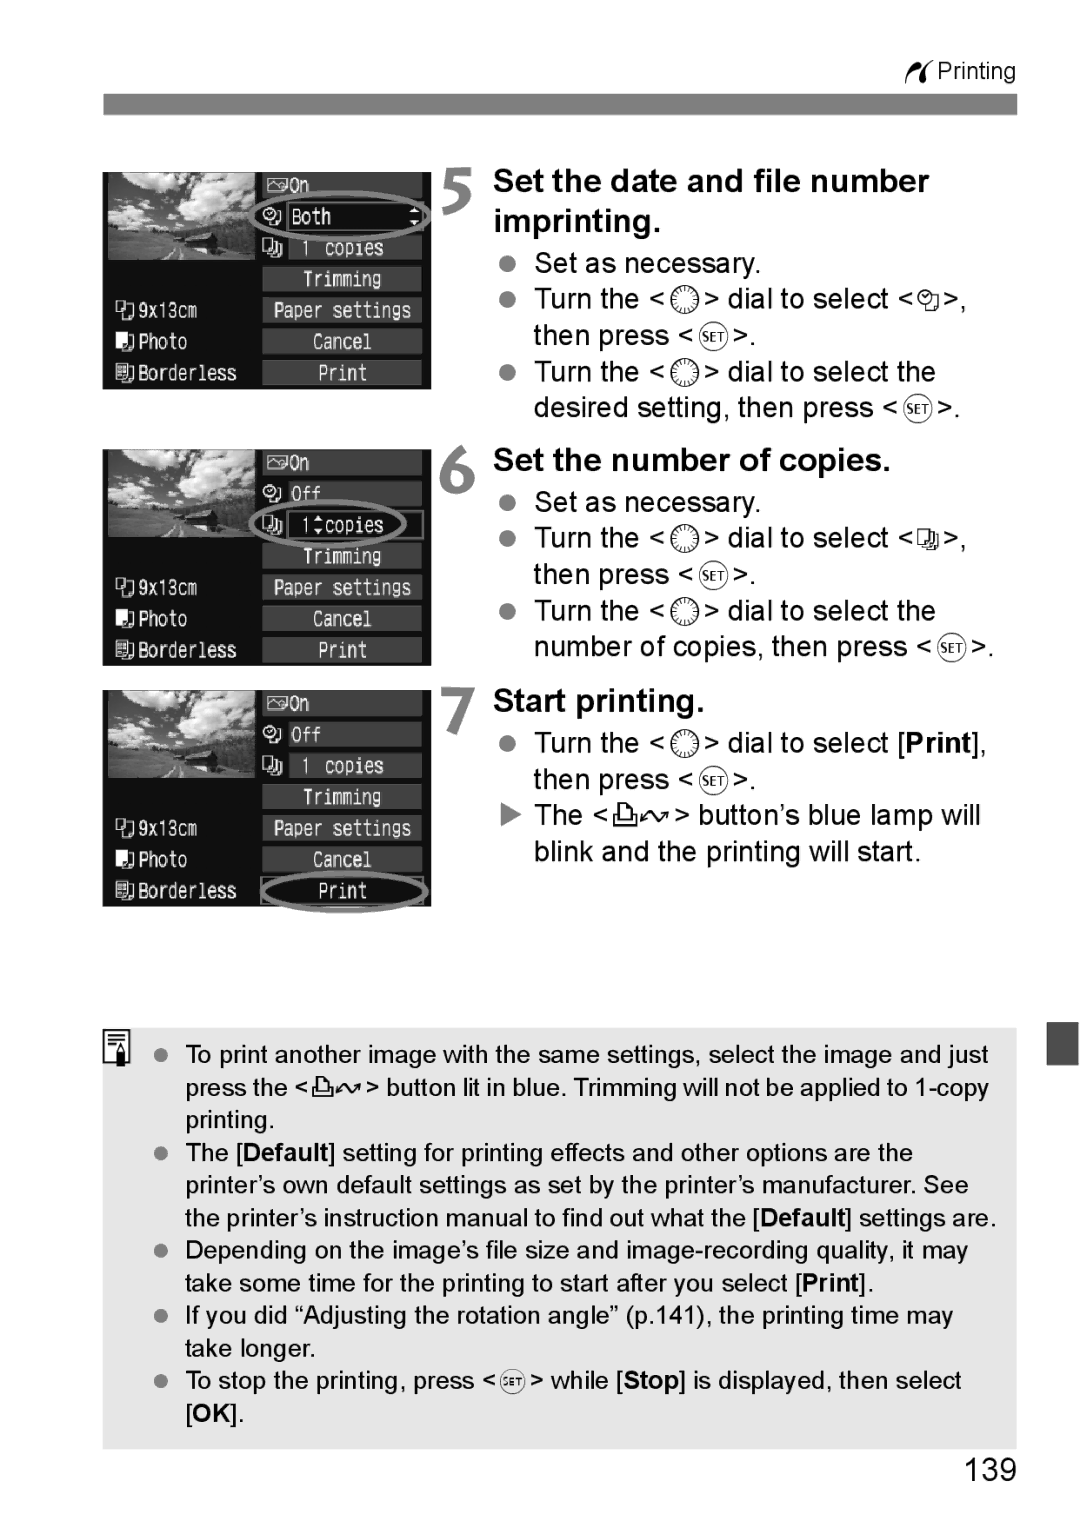 Canon EOS40D instruction manual Set the date and file number imprinting, Start printing, 139 